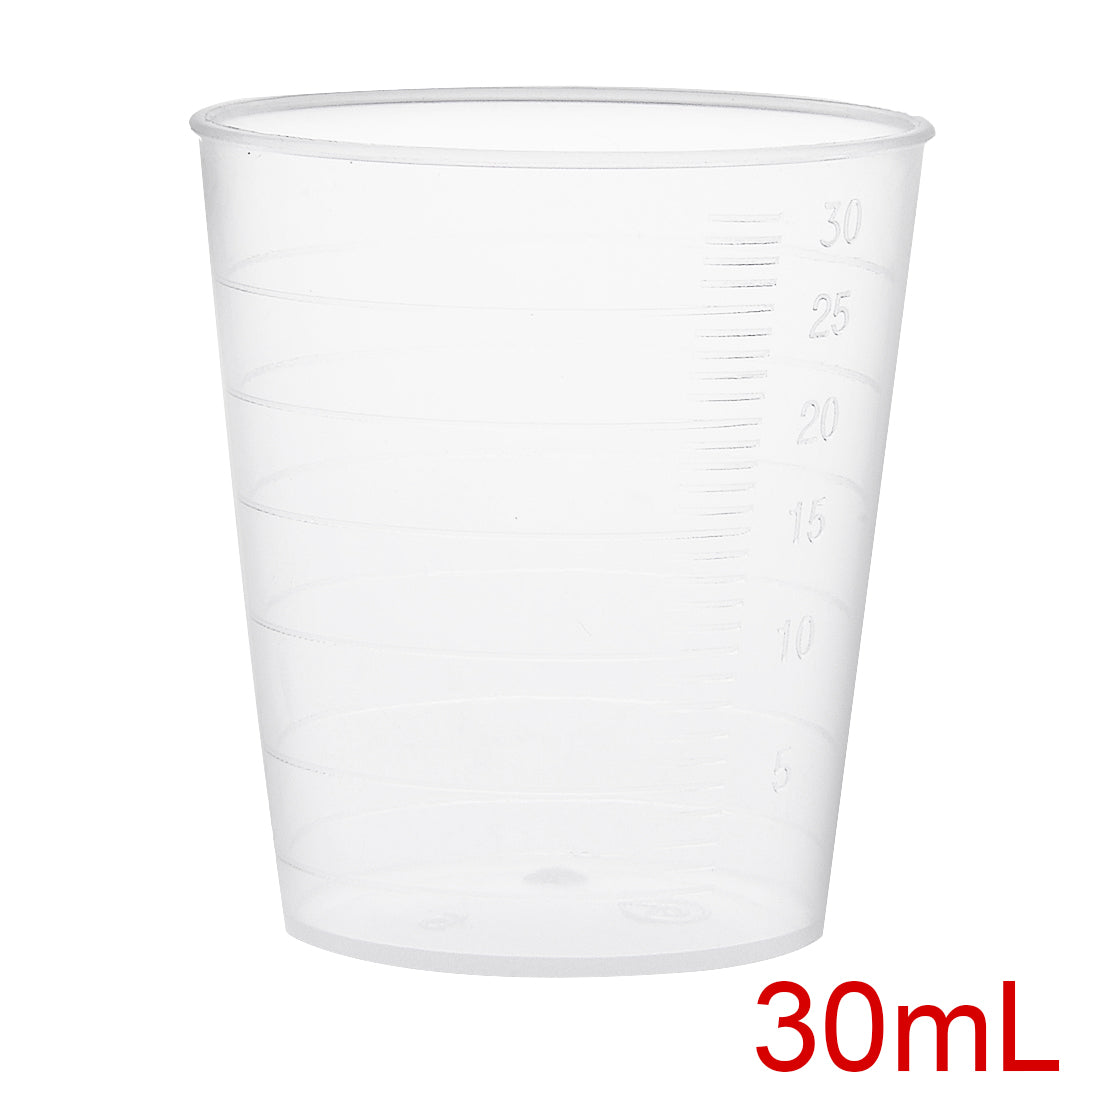 uxcell Uxcell Kitchen Laboratory 30mL Plastic Measuring Cup 2pcs w Cap